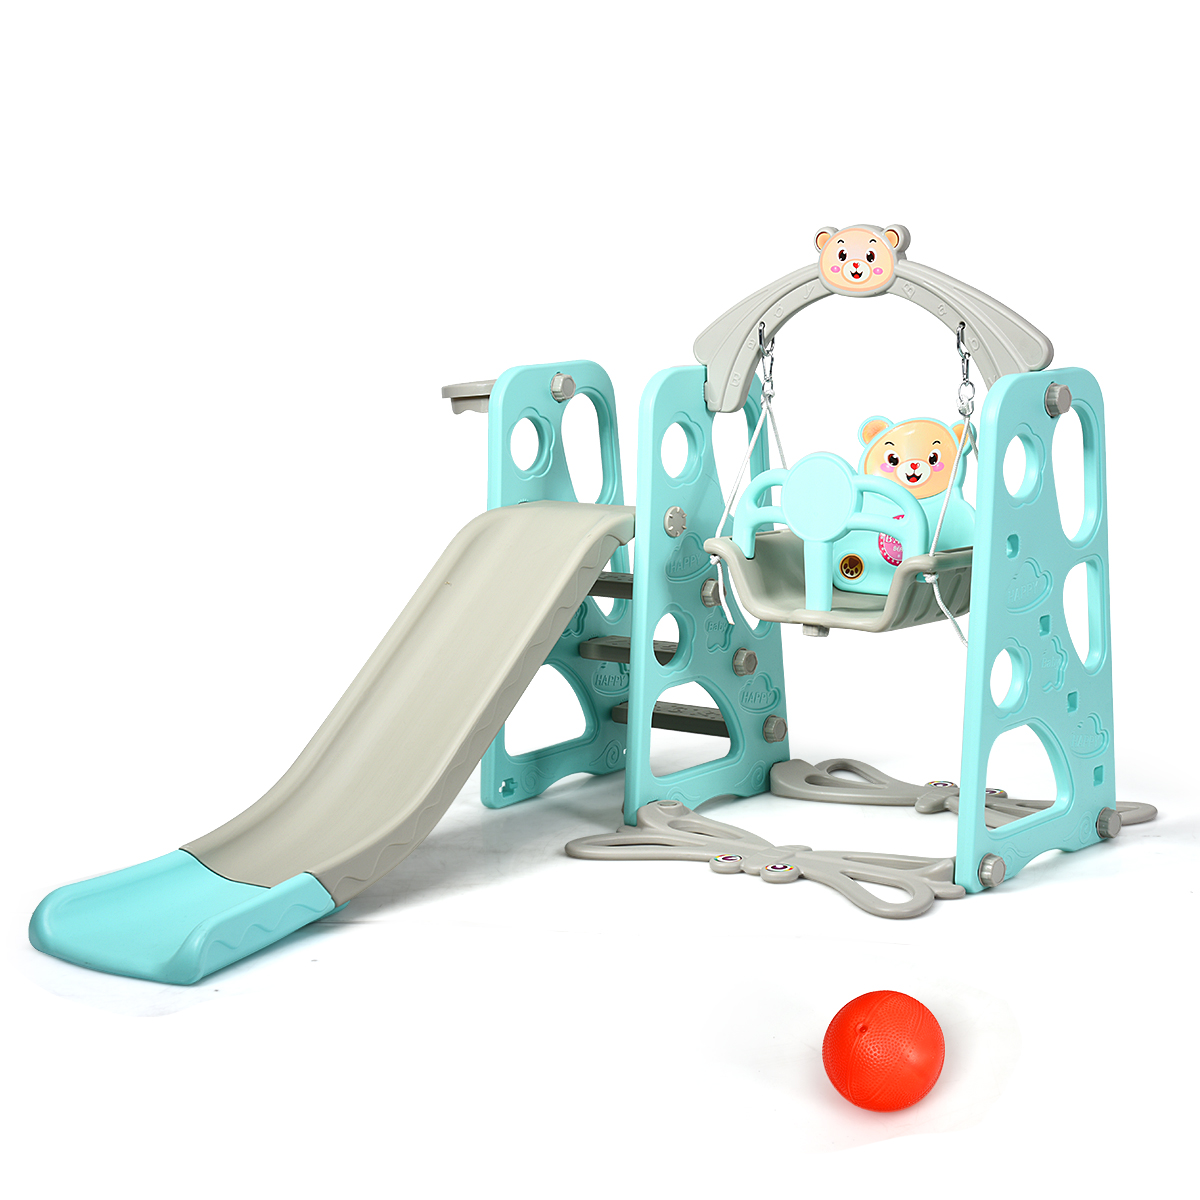 Costway 3 in 1 Toddler Climber and Swing Set Slide Playset with Basketball Hoop & Ball